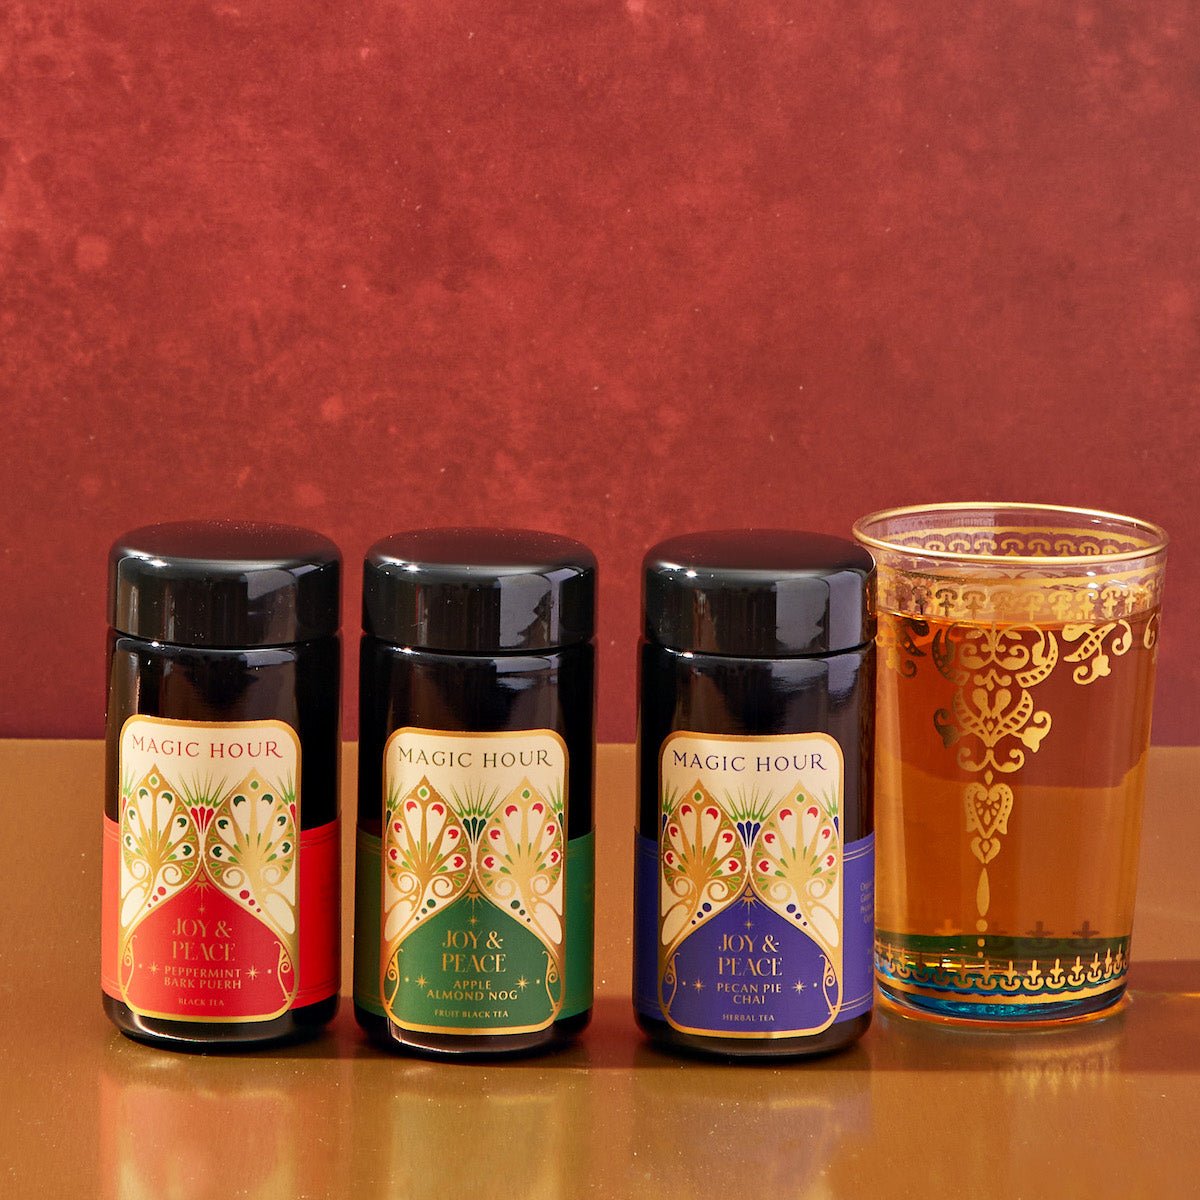 Peace & Joy Traveler Bundle-Peace & Joy Traveler Bundle with Midas Touch-Magic Hour